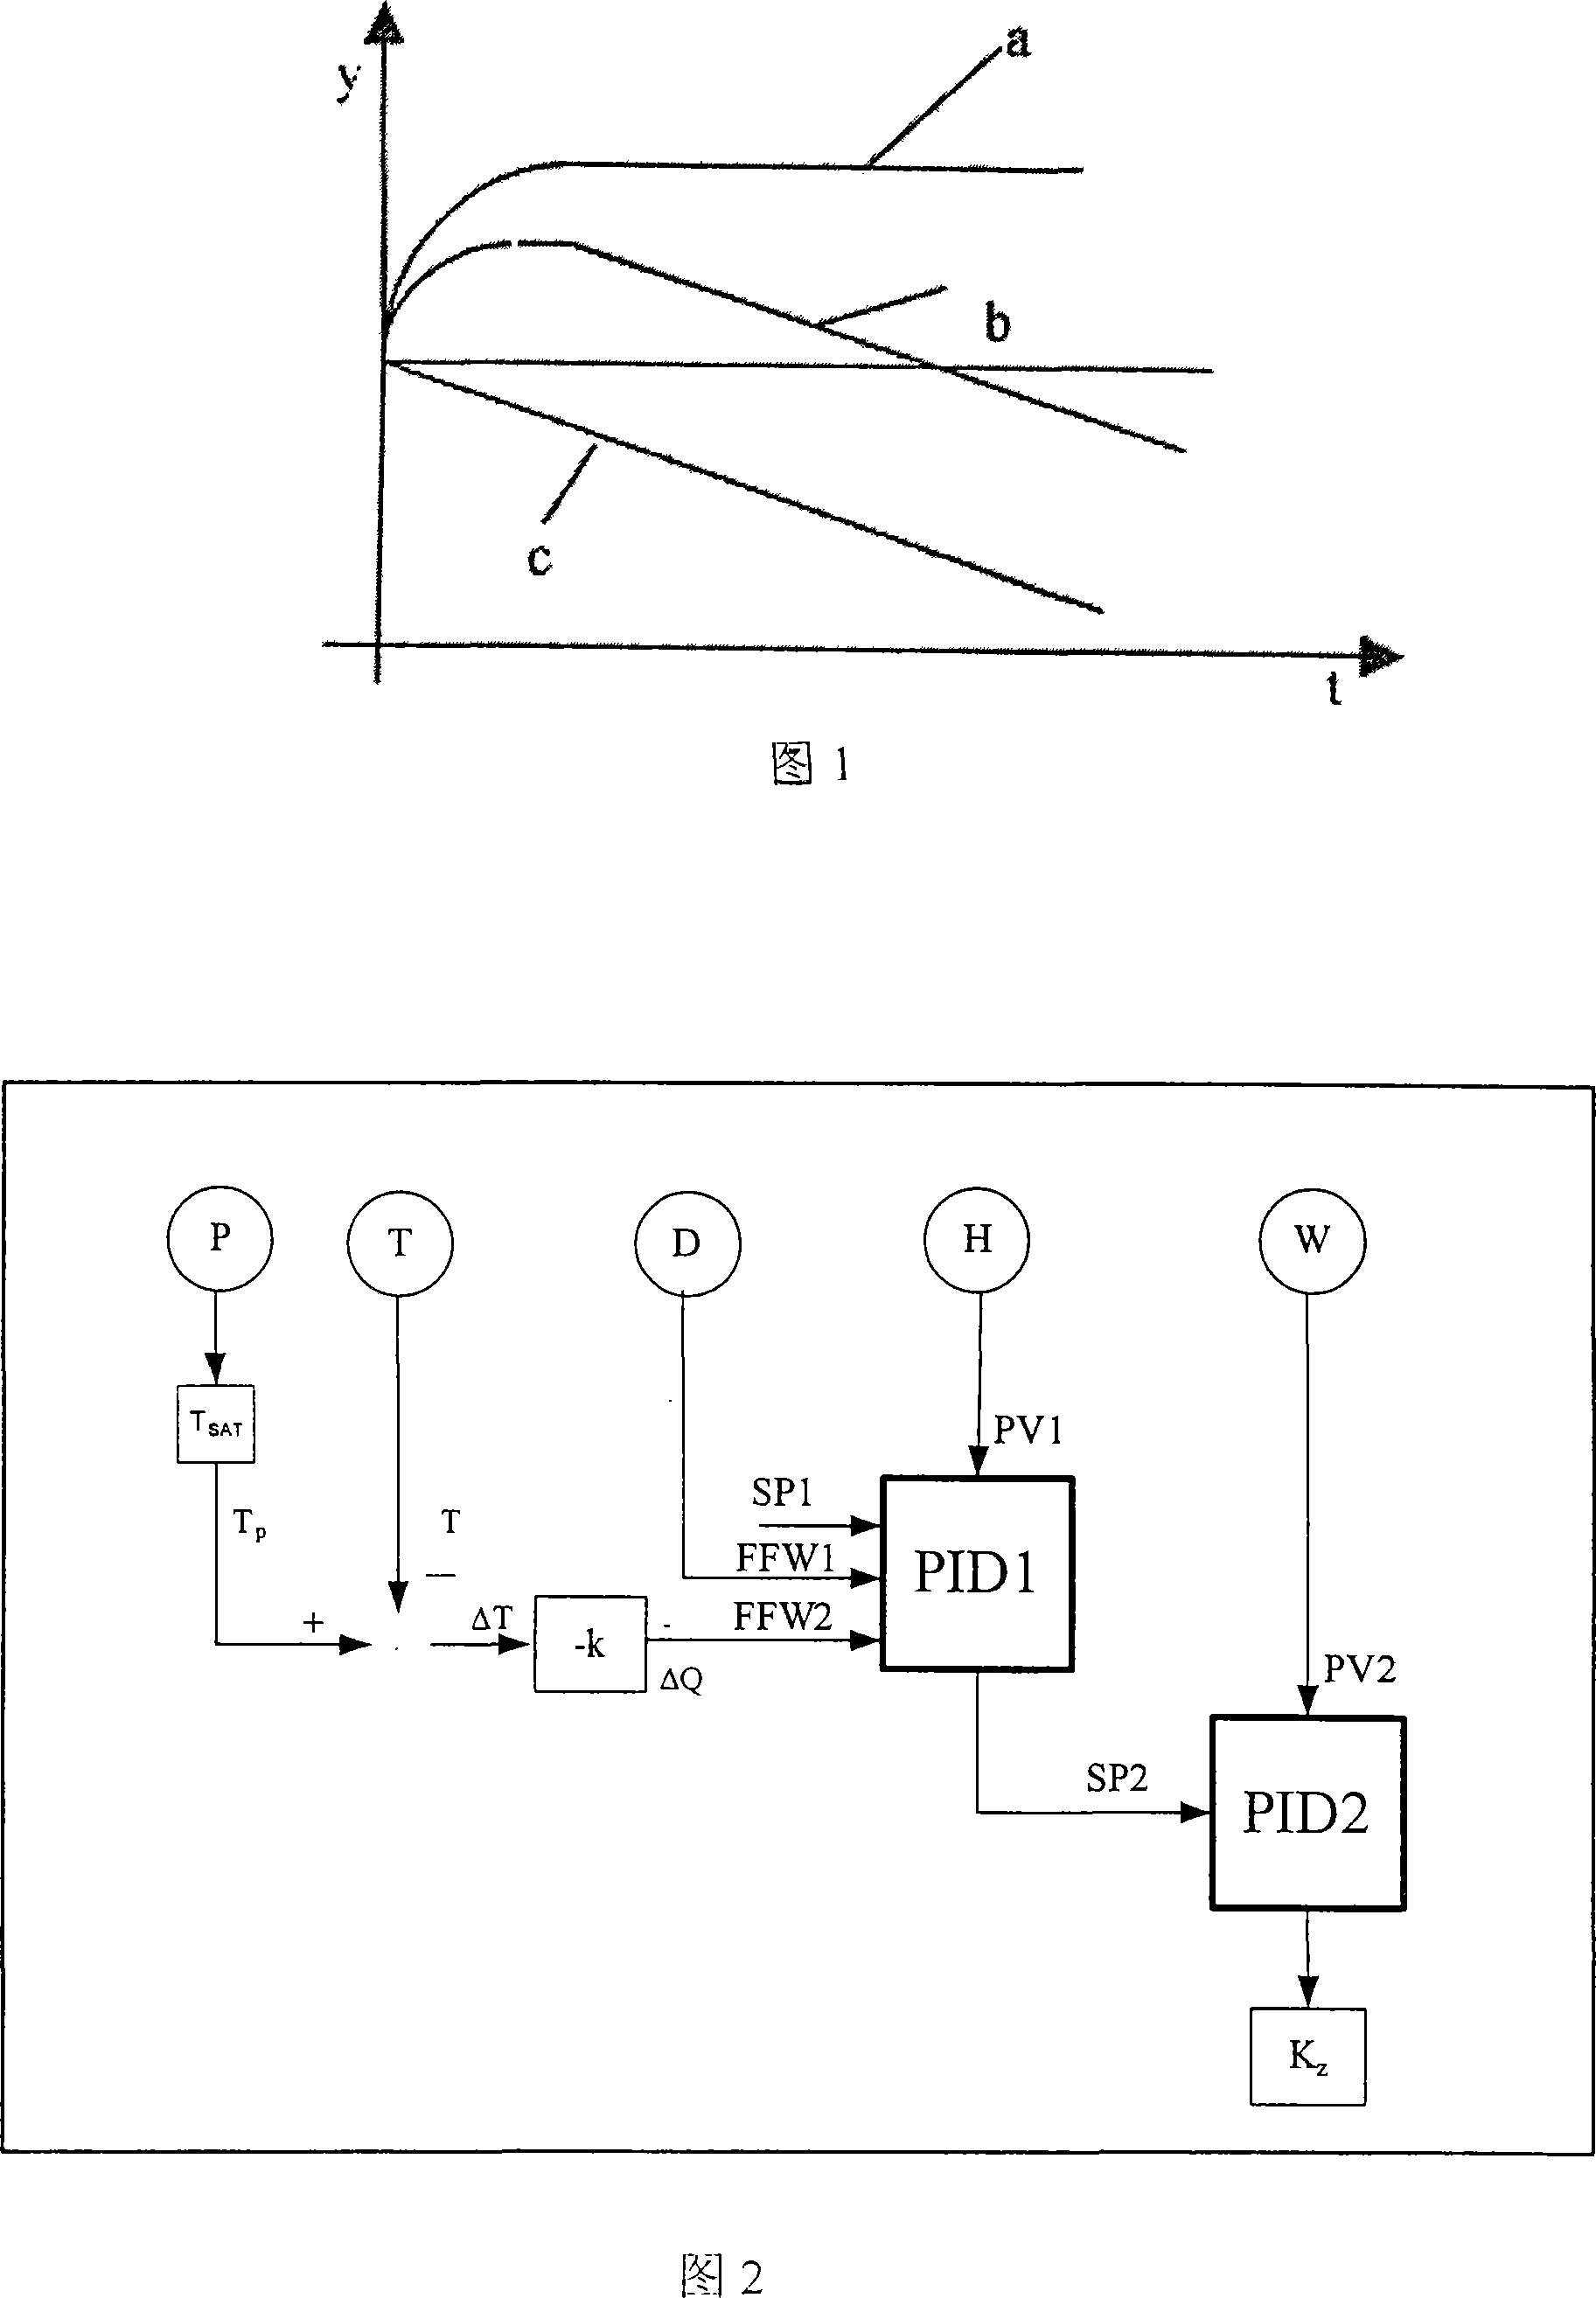 Method for correcting water level of steam drum based on temperature and pressure